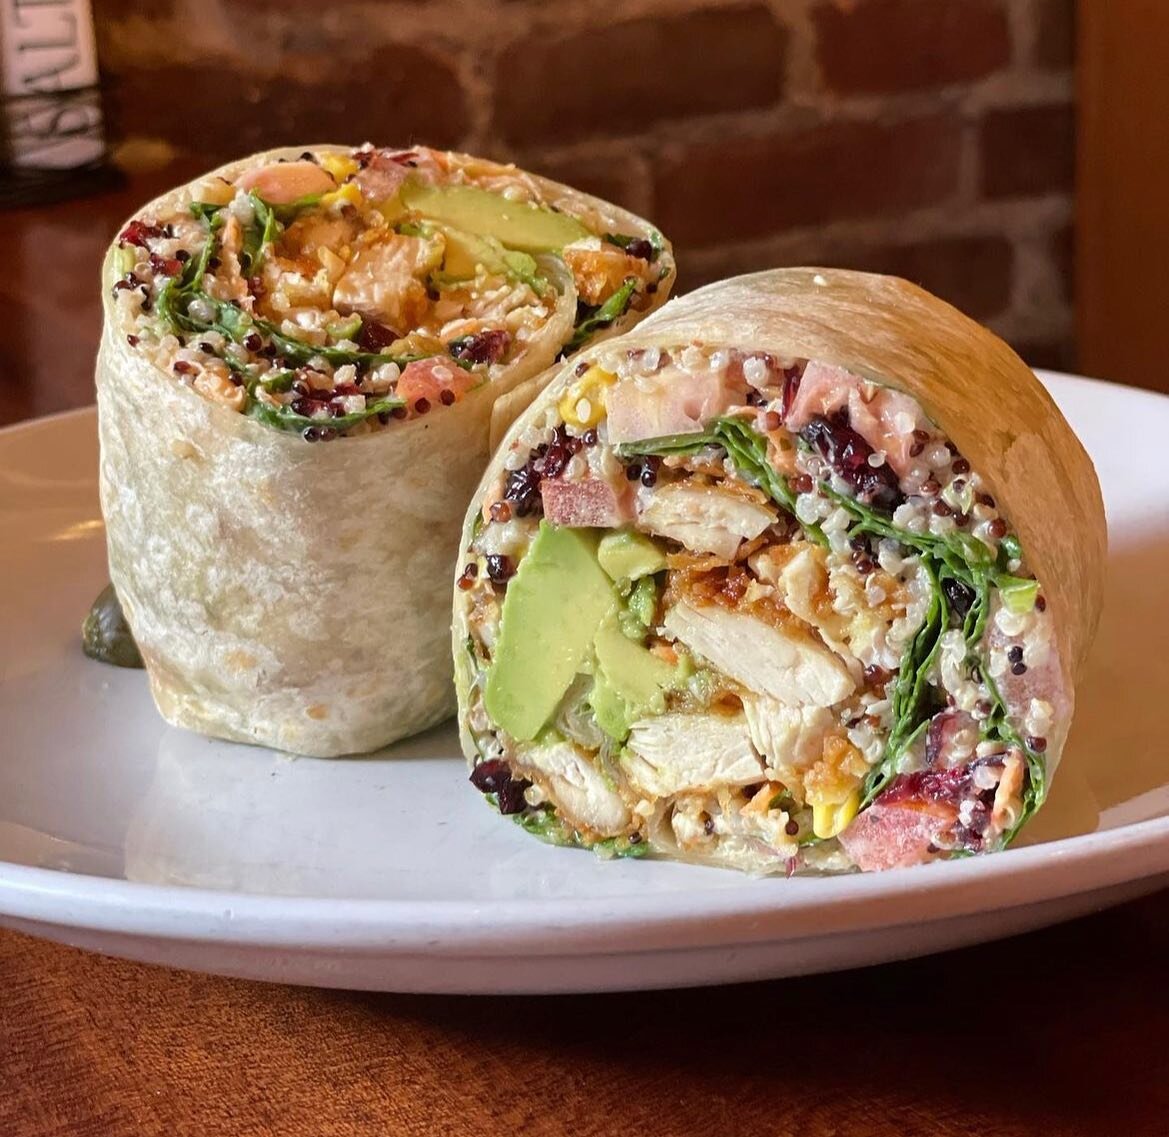 Did you miss us today?  Plan your Wednesday lunch 🌯 :: Order this KALE &amp; QUINOA WRAP fried chicken cutlet (made to order) cut up and tossed with baby kale, tri-color quinoa, avocado, tomatoes, shredded carrots, corn and dried cranberries mixed w